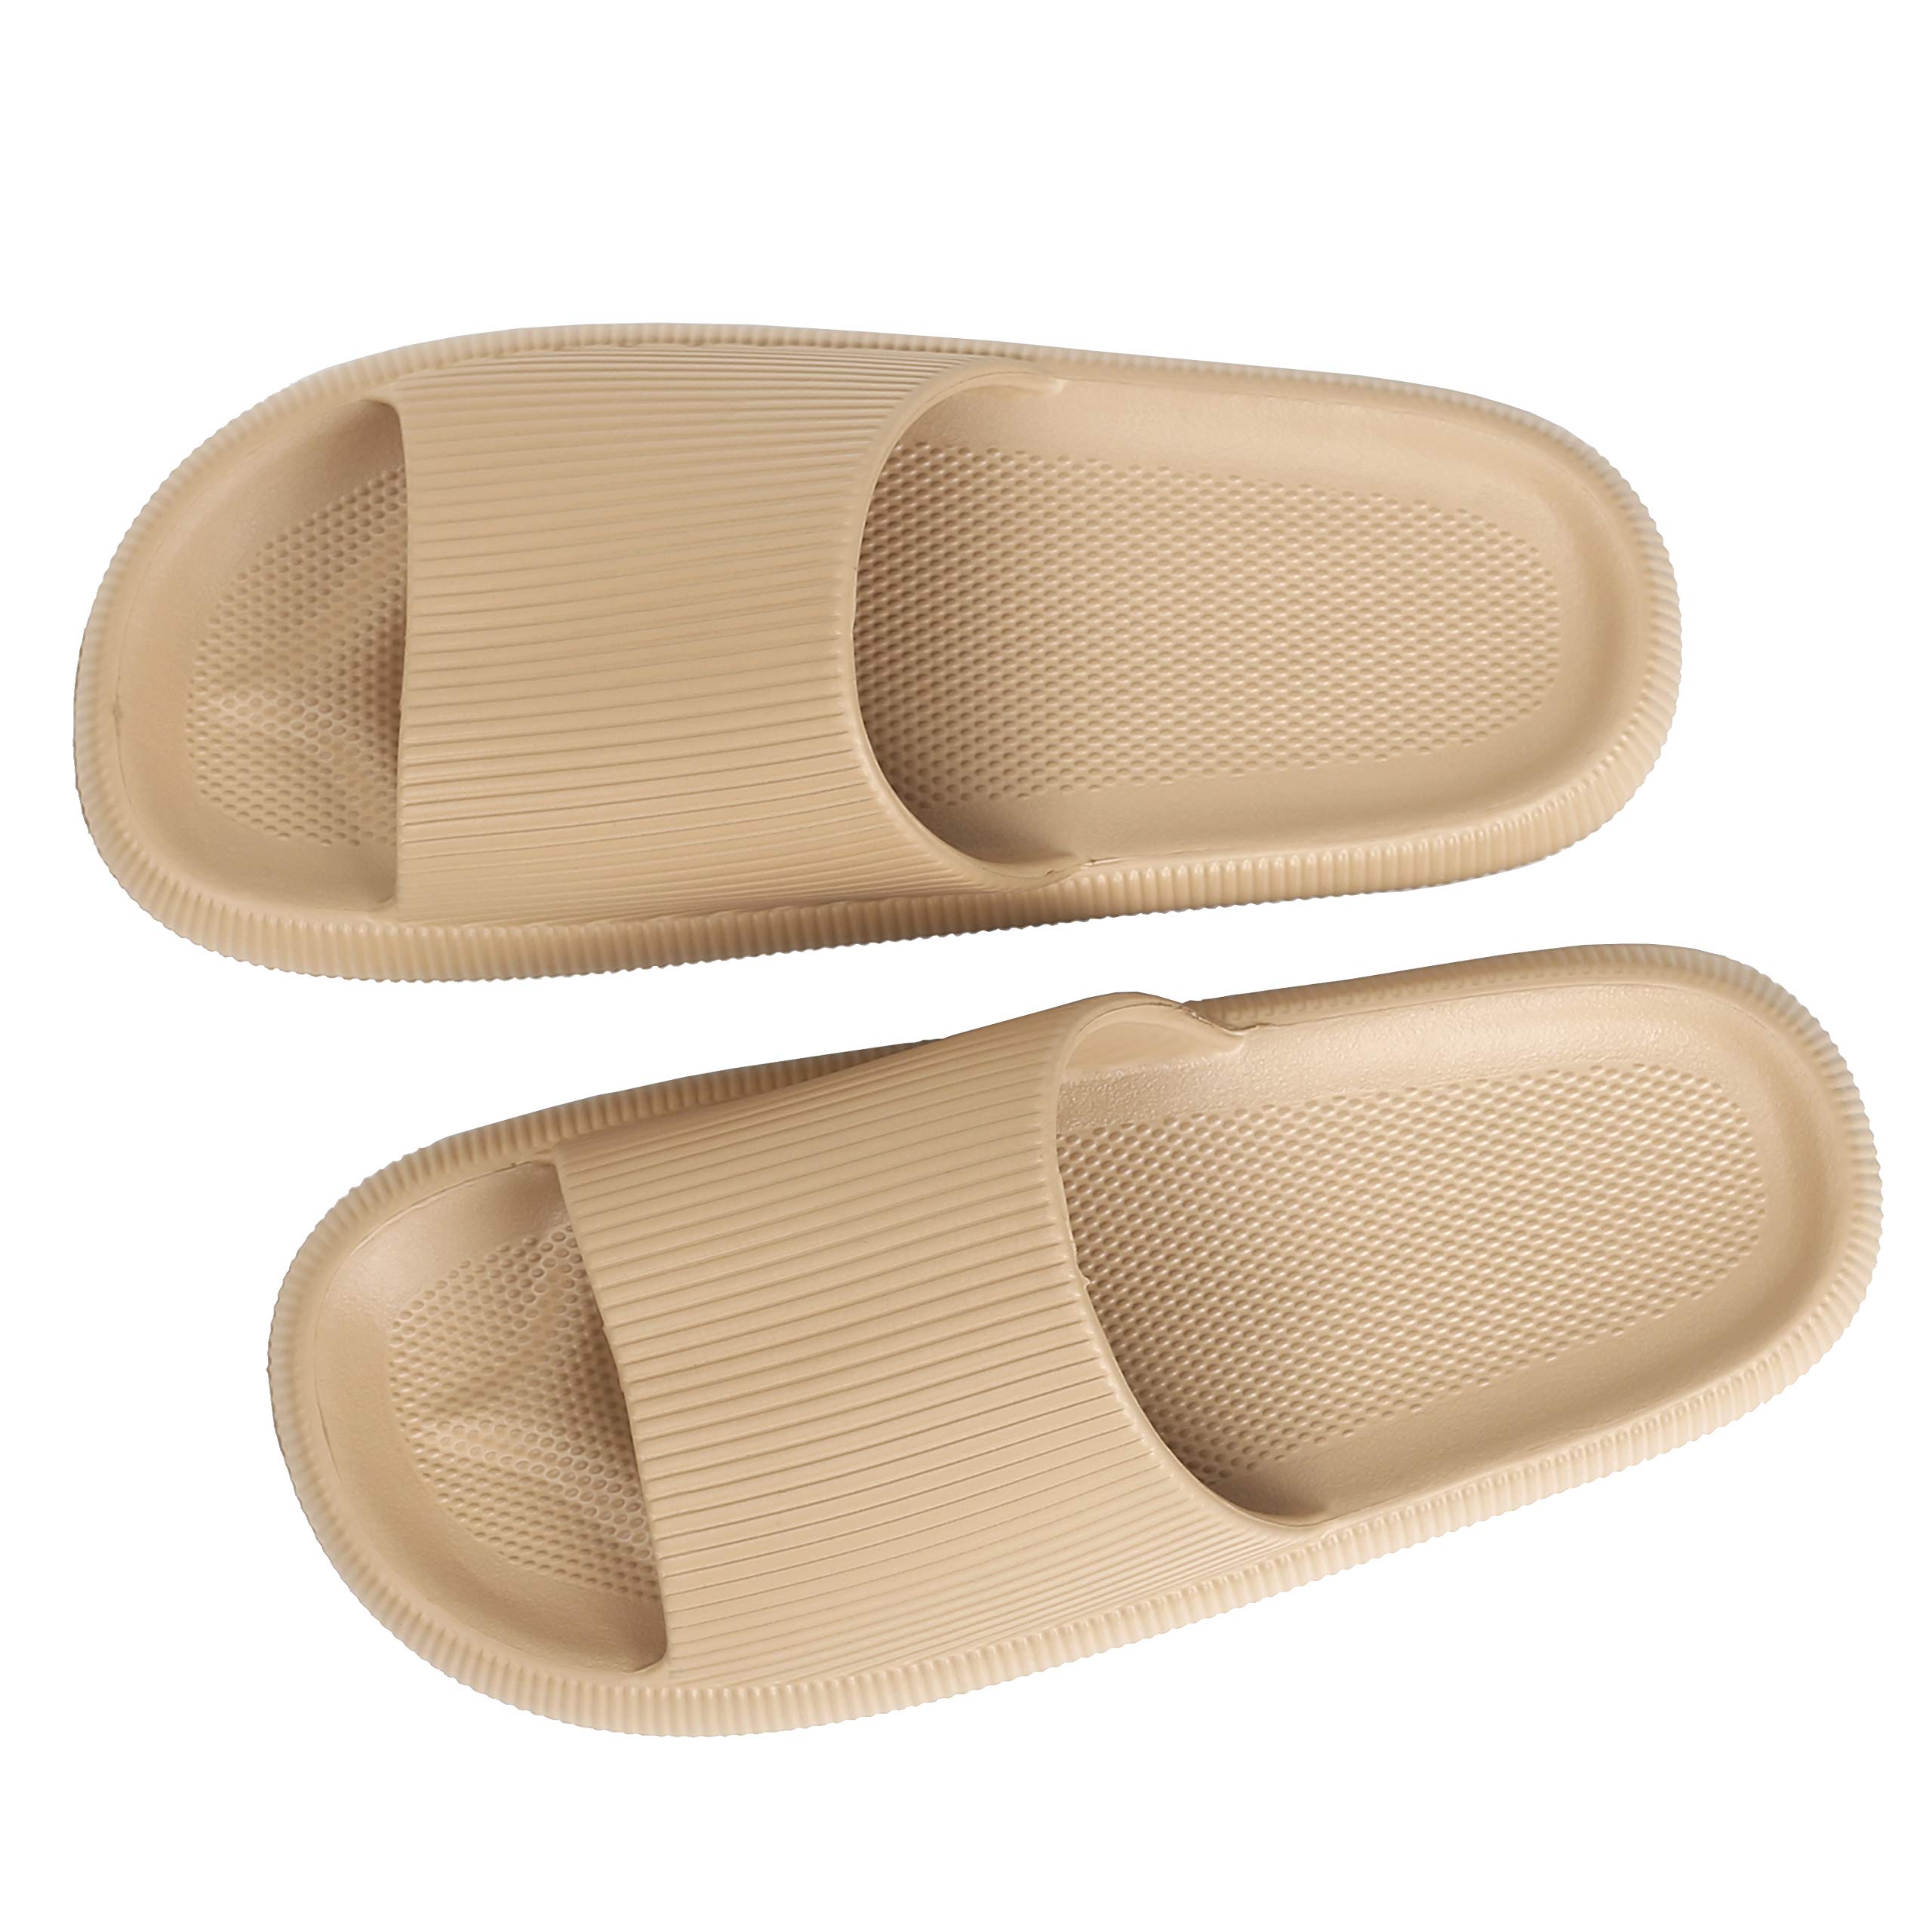 Shower Slipper, Quick Drying Non-Slip Slippers, Bathroom House and Pool Sandals, in-Door Slipper for Gym, Soft Sole